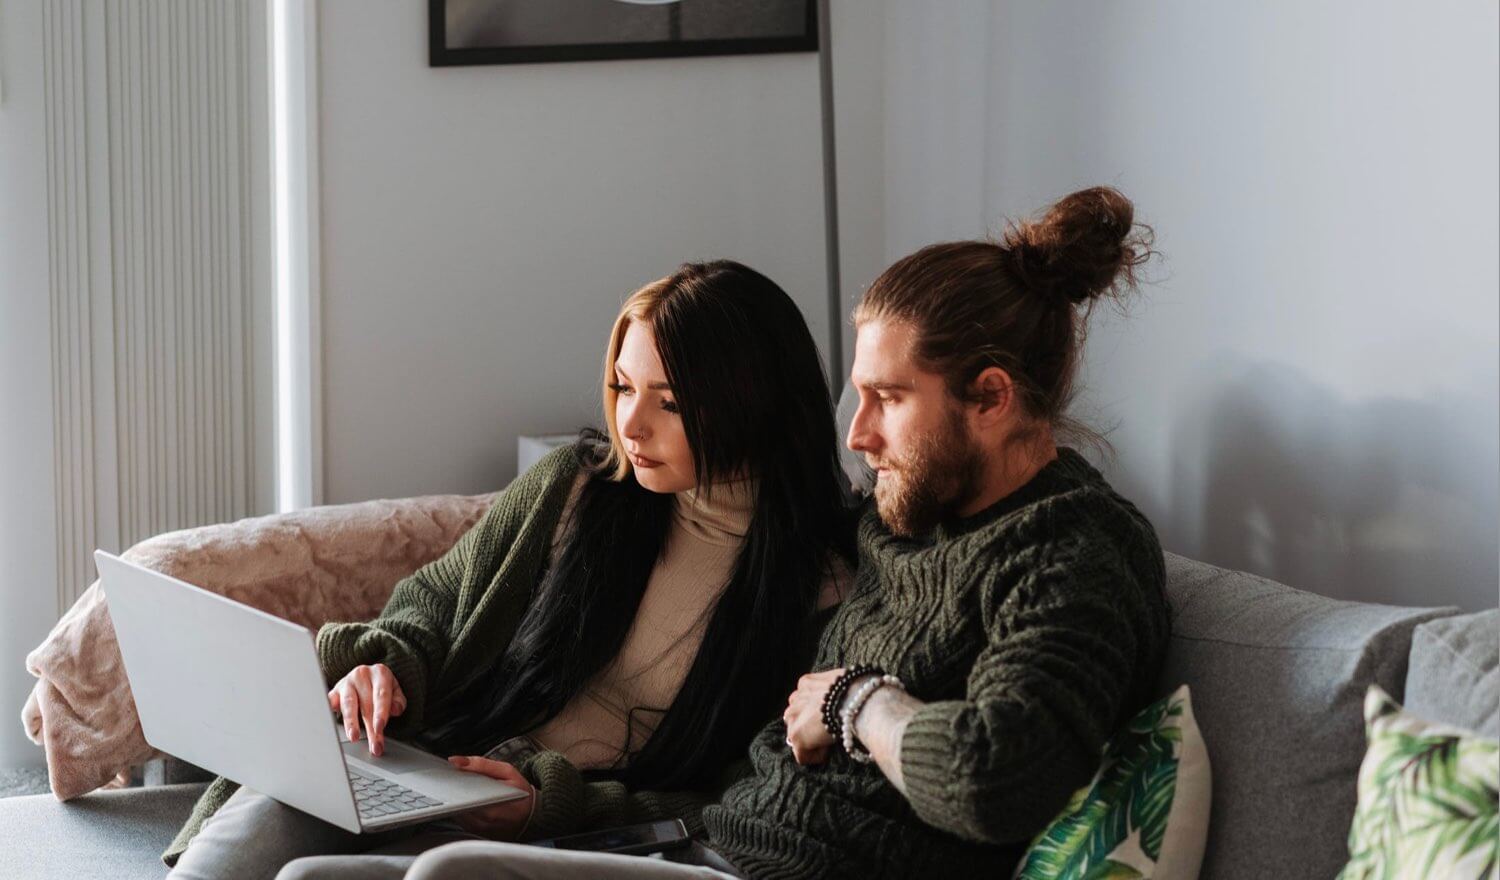 Two people looking at a device on the couch